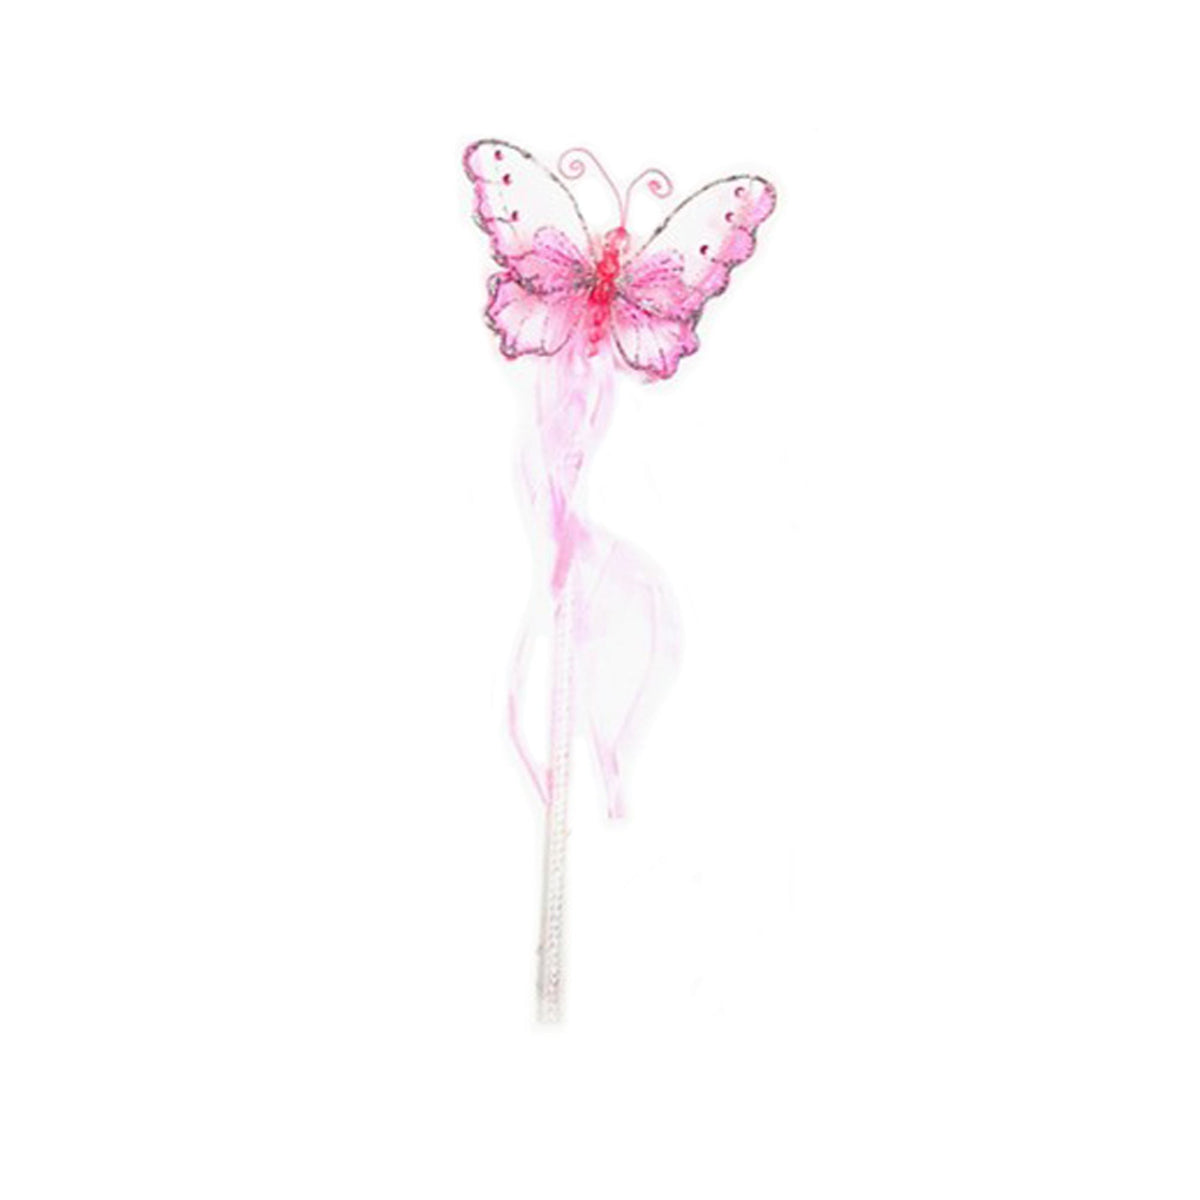 IVY TRADING INC. Costume Accessories Pink Butterfly Fairy Wand, 5.5 Inches, 1 Count